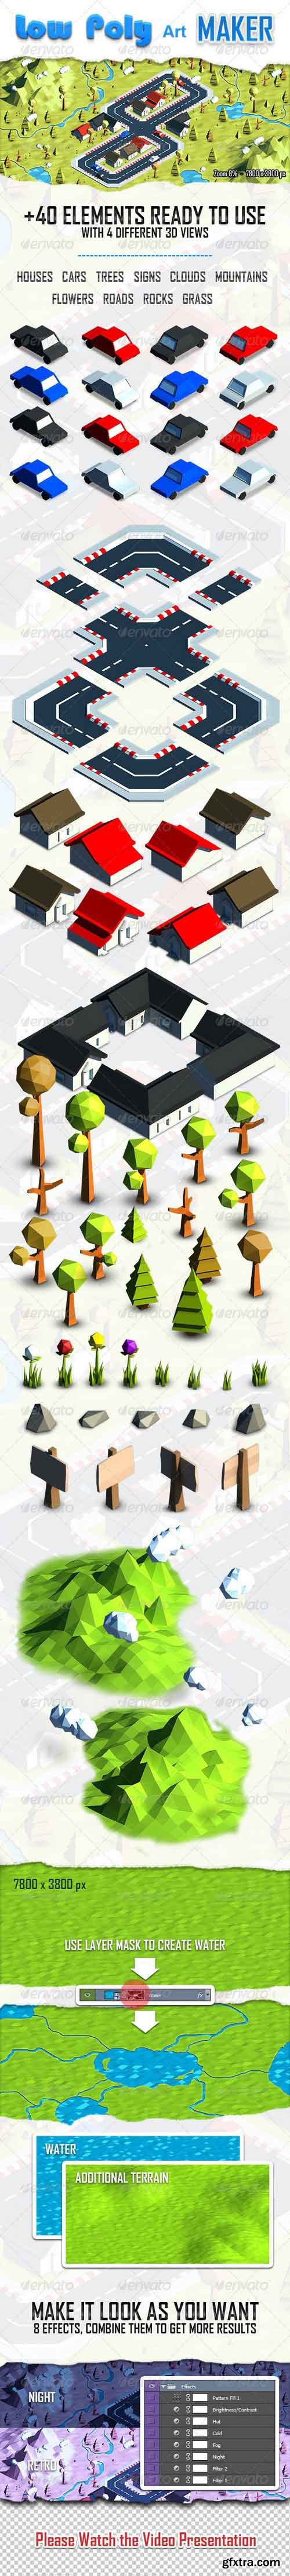 Graphicriver - Low Poly Art Maker 6701567